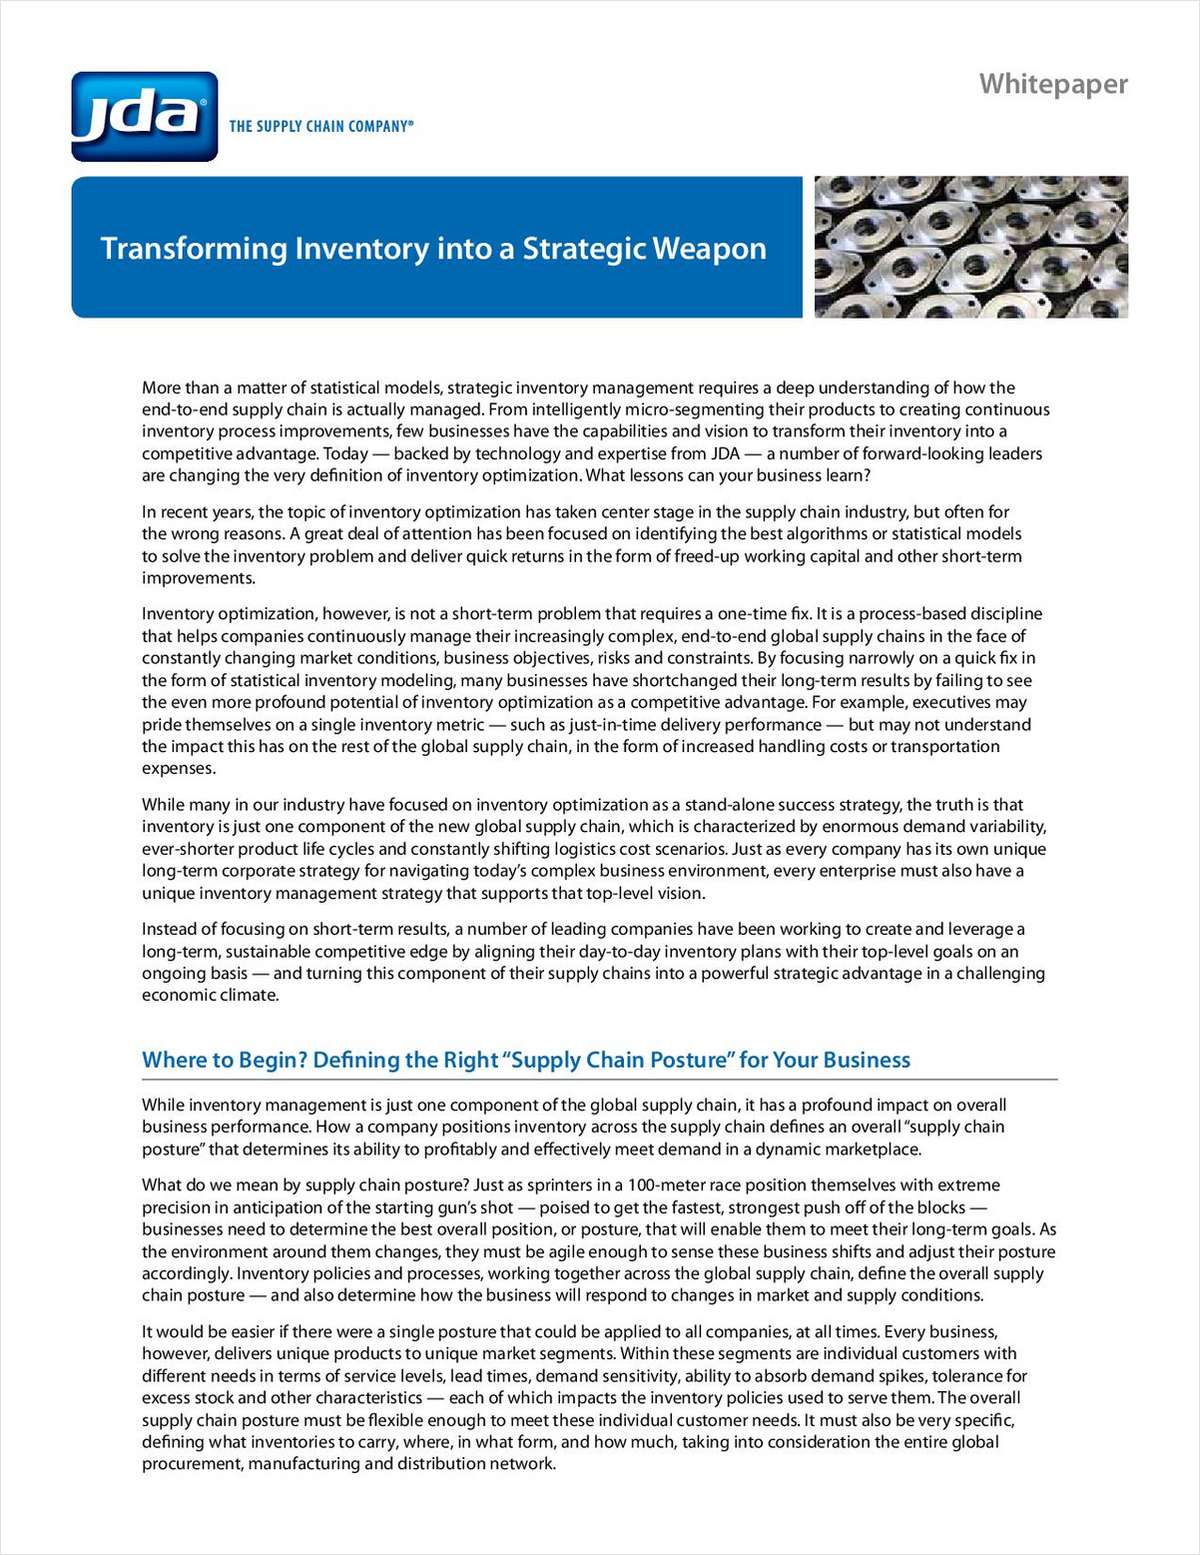 Transform Inventory into a Strategic Weapon